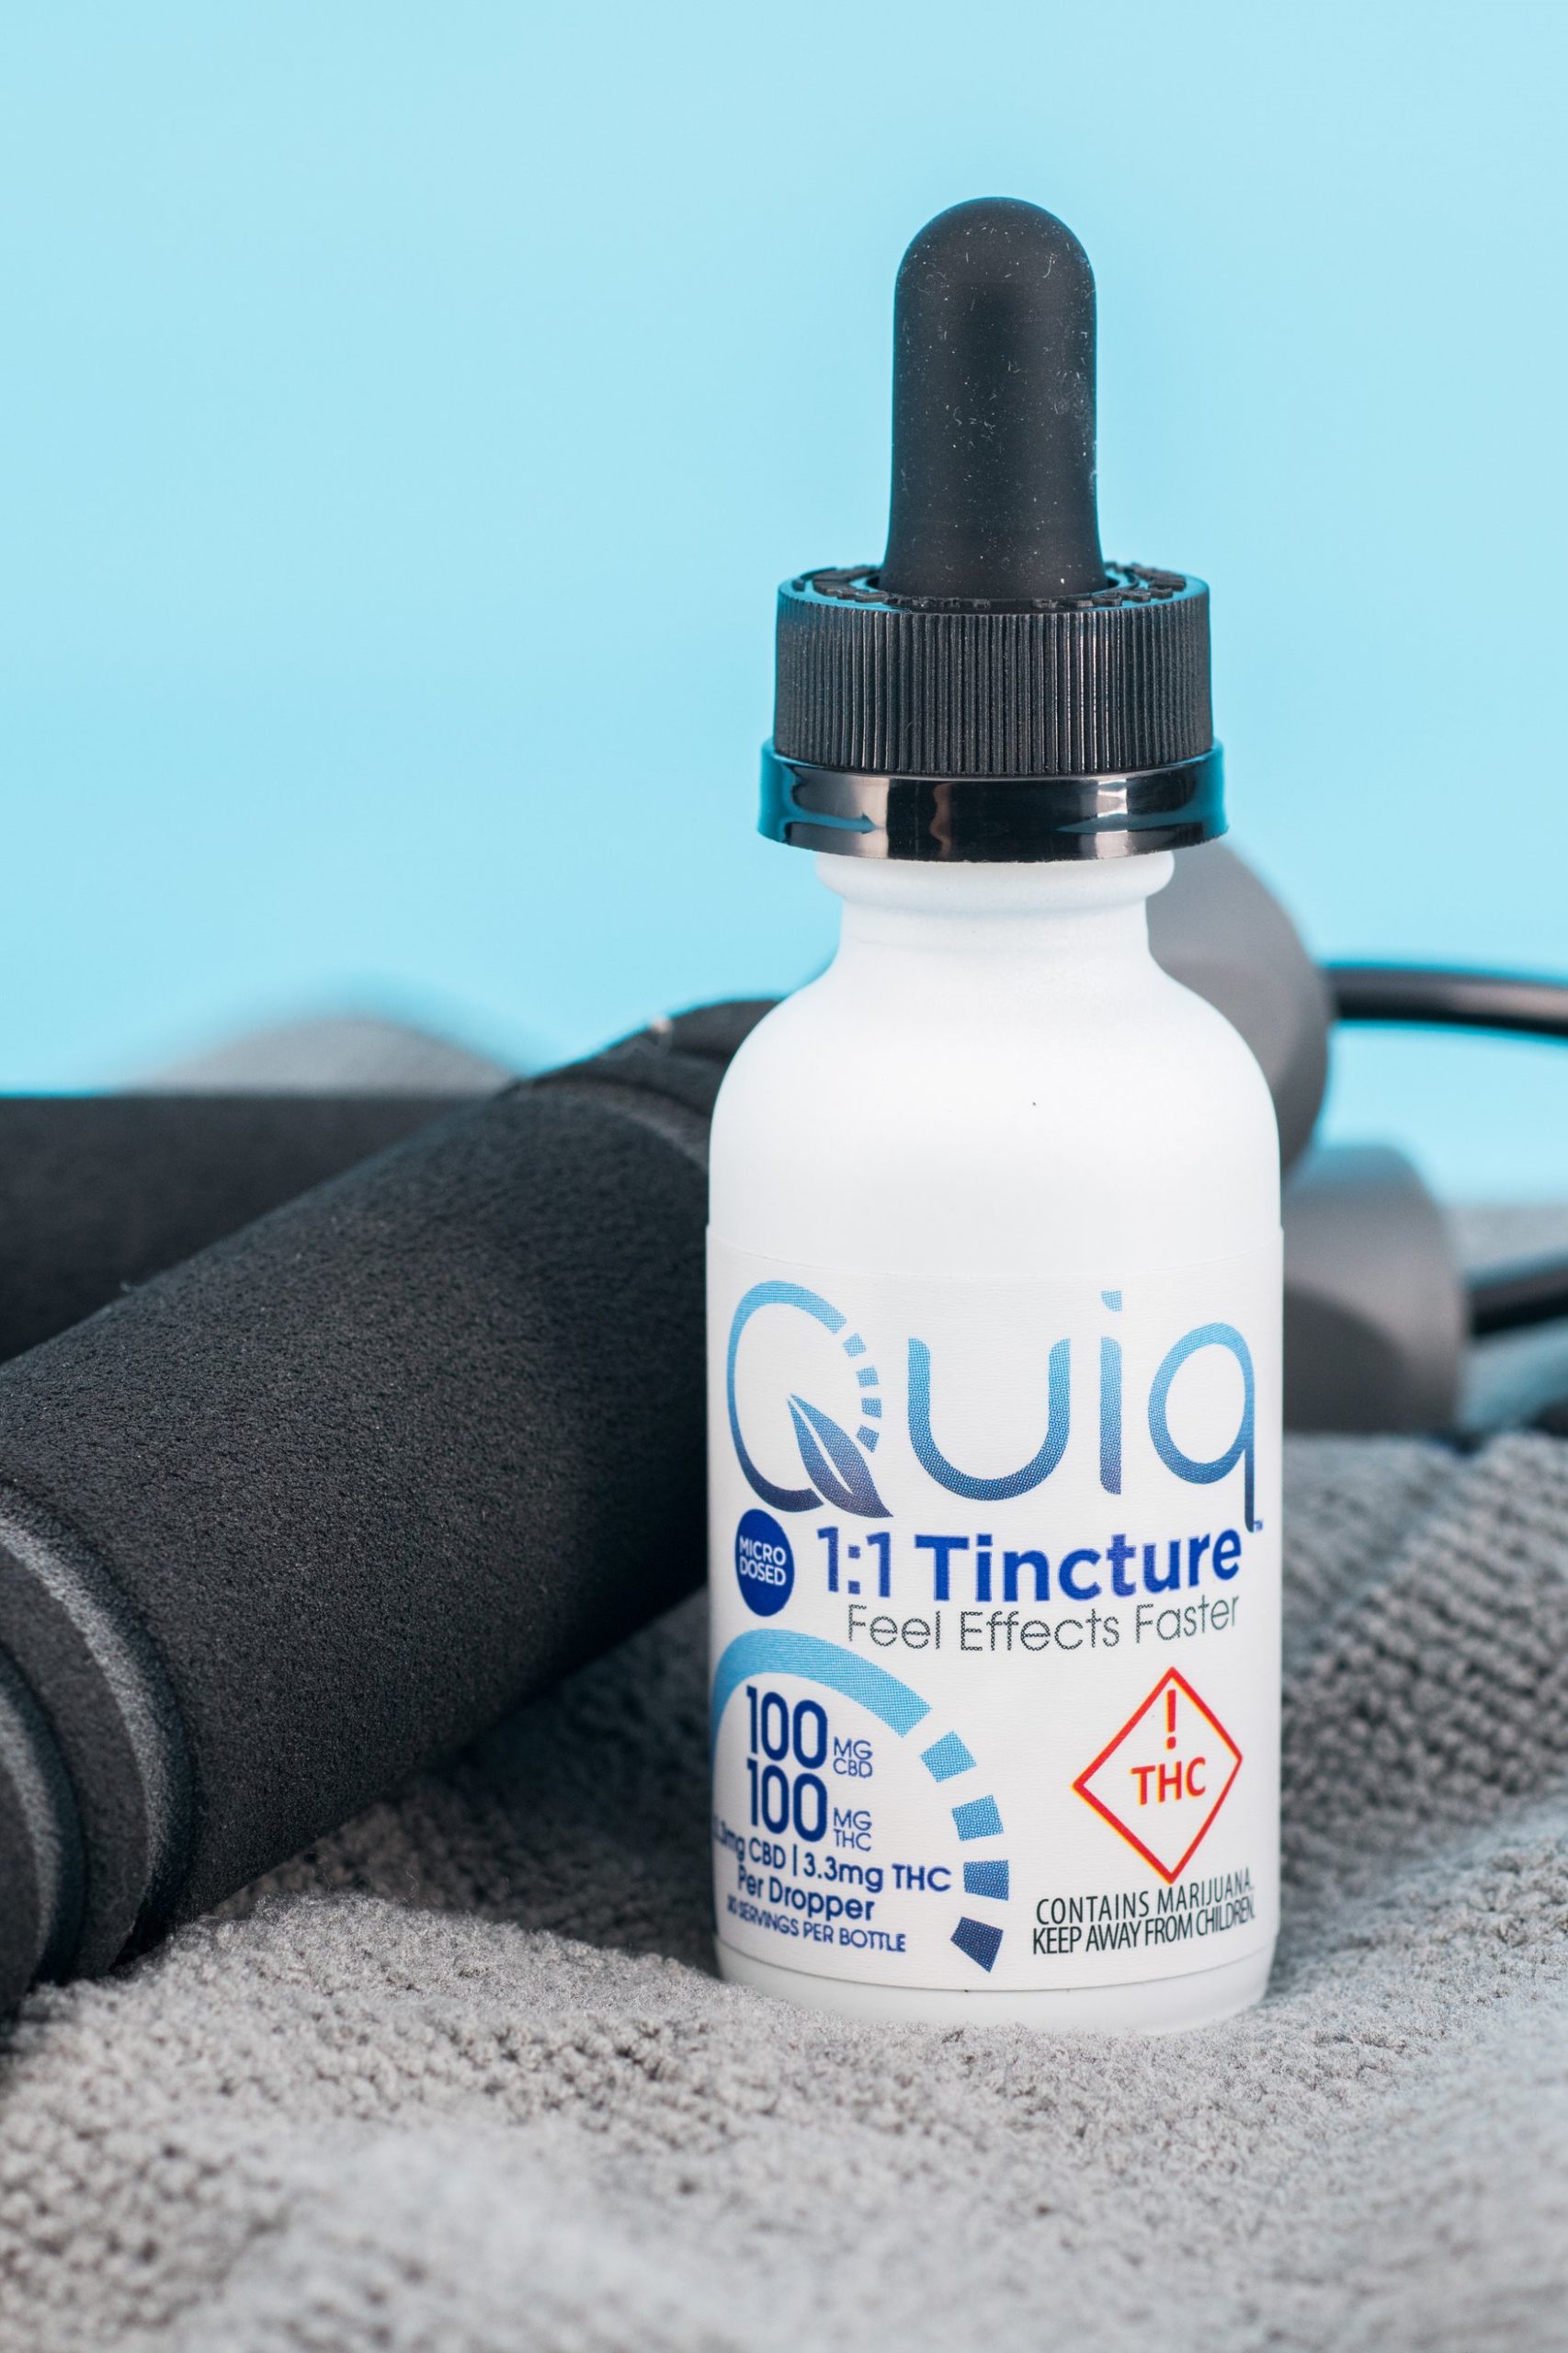 Qiuq fast-acting, CBD-infused tincture; improve athletic recovery with cannabis edibles.